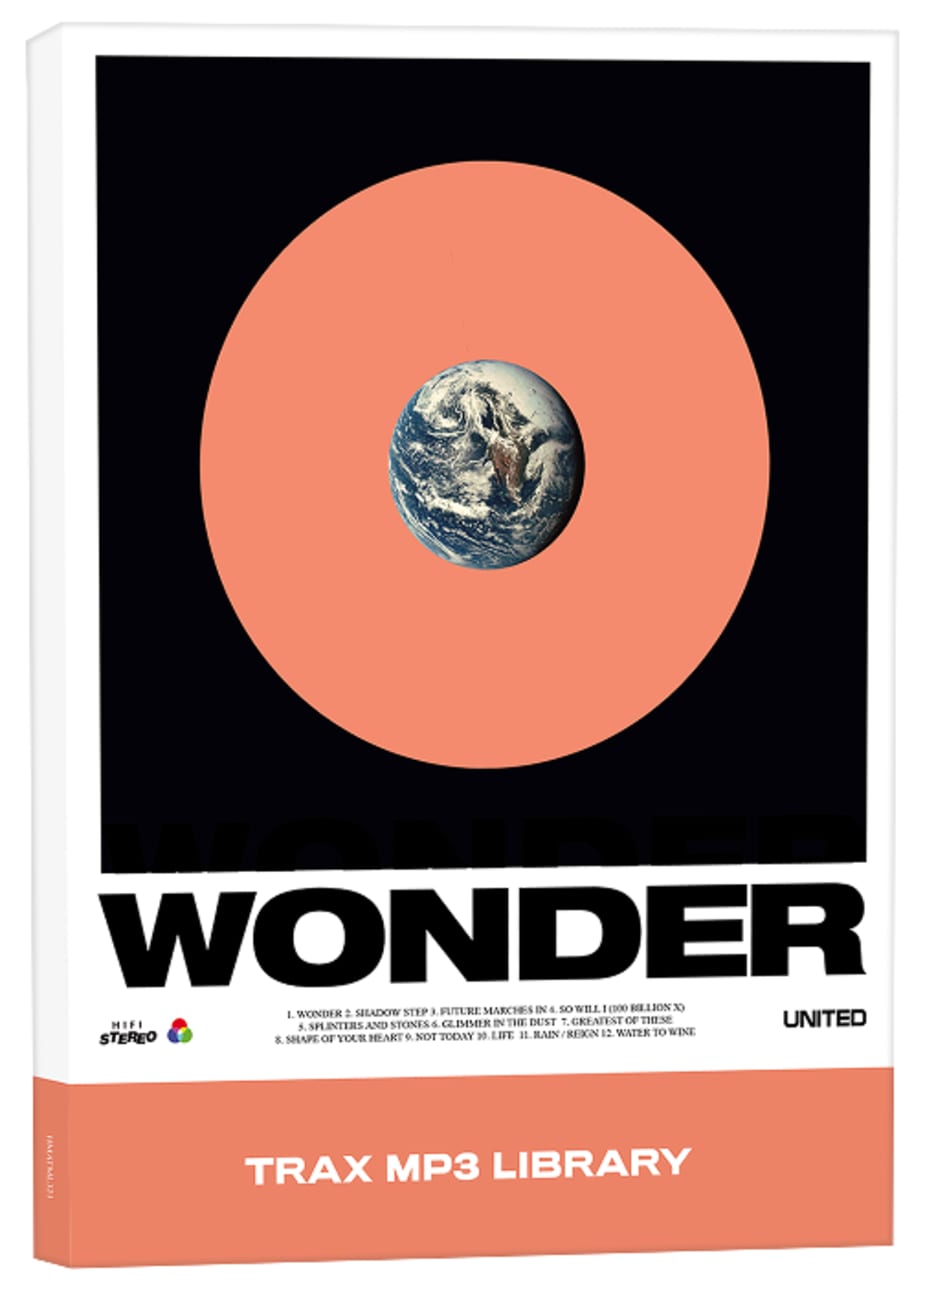 Hillsong United 2017: Wonder (Trax Mp3 Library) Compact Disc